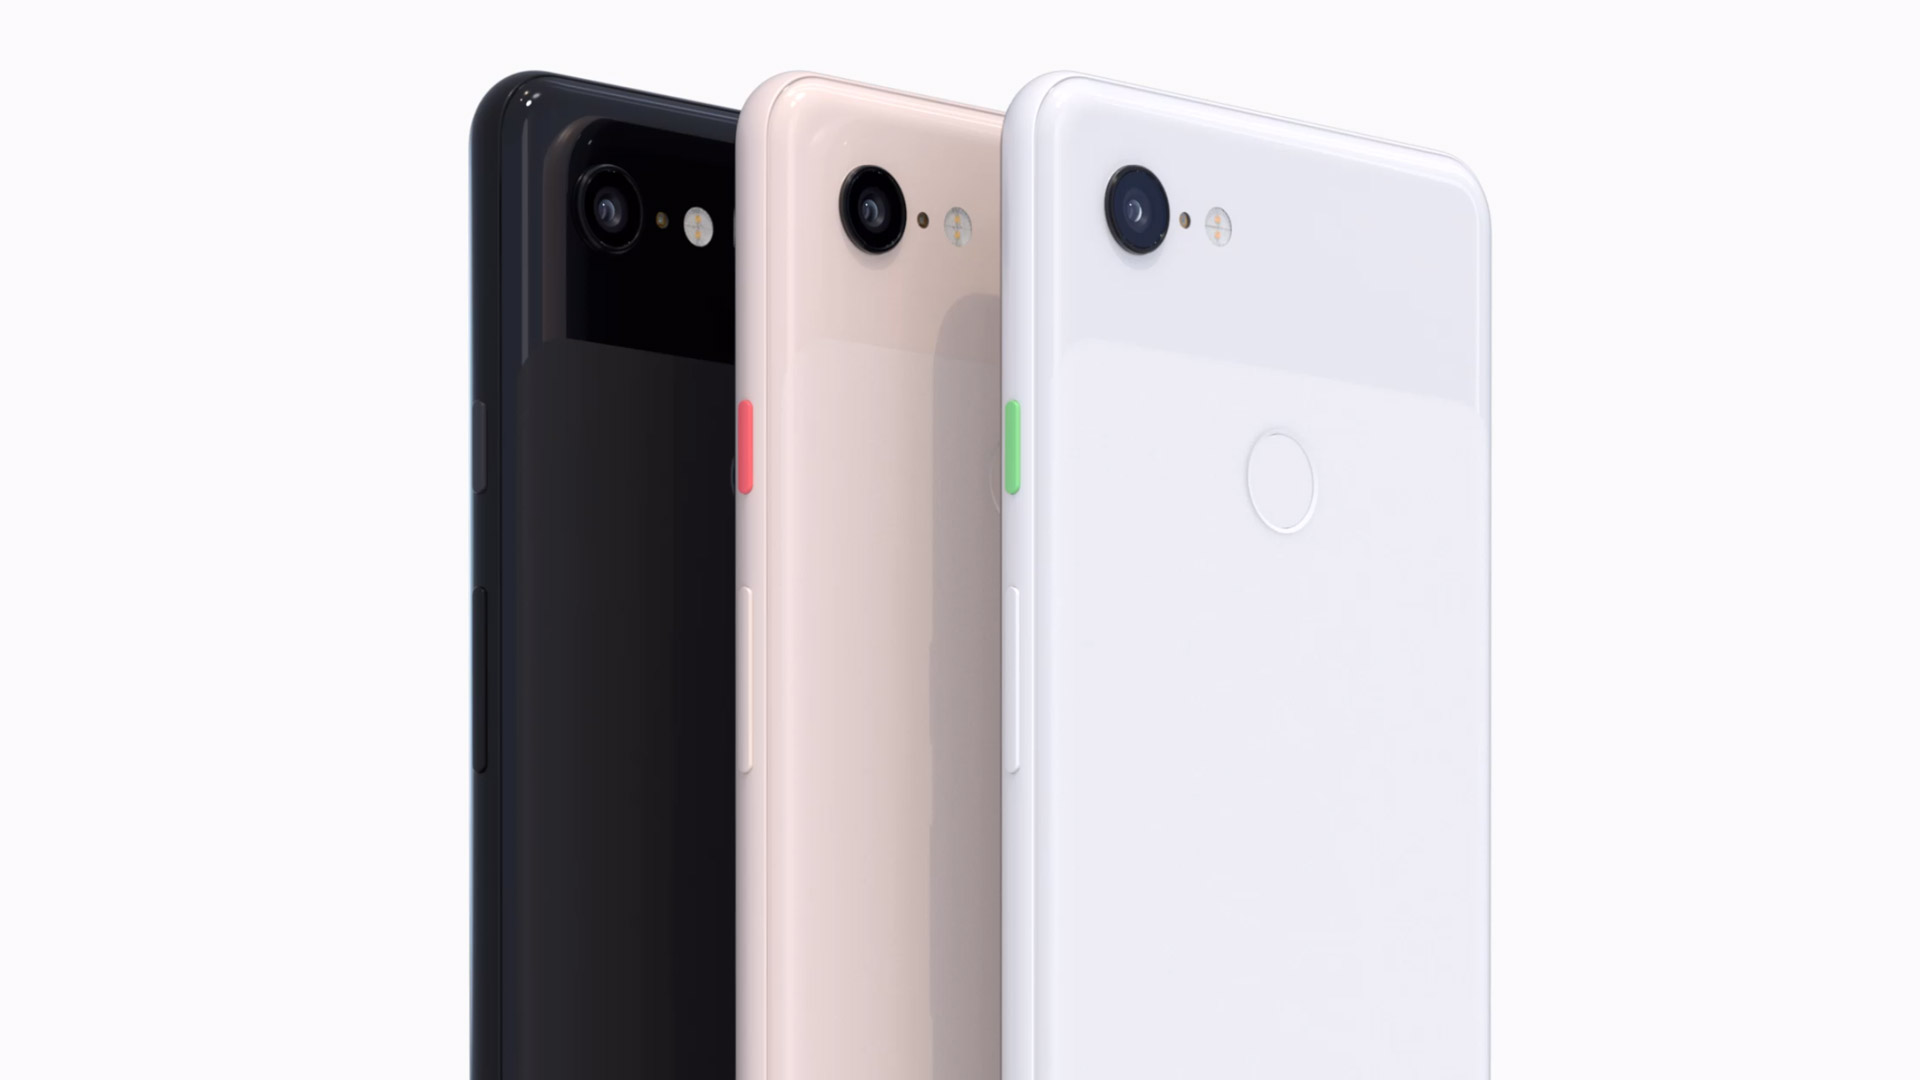 New Pixel 3 & Pixel 3 XL Are Daydream Ready, Google Confirms